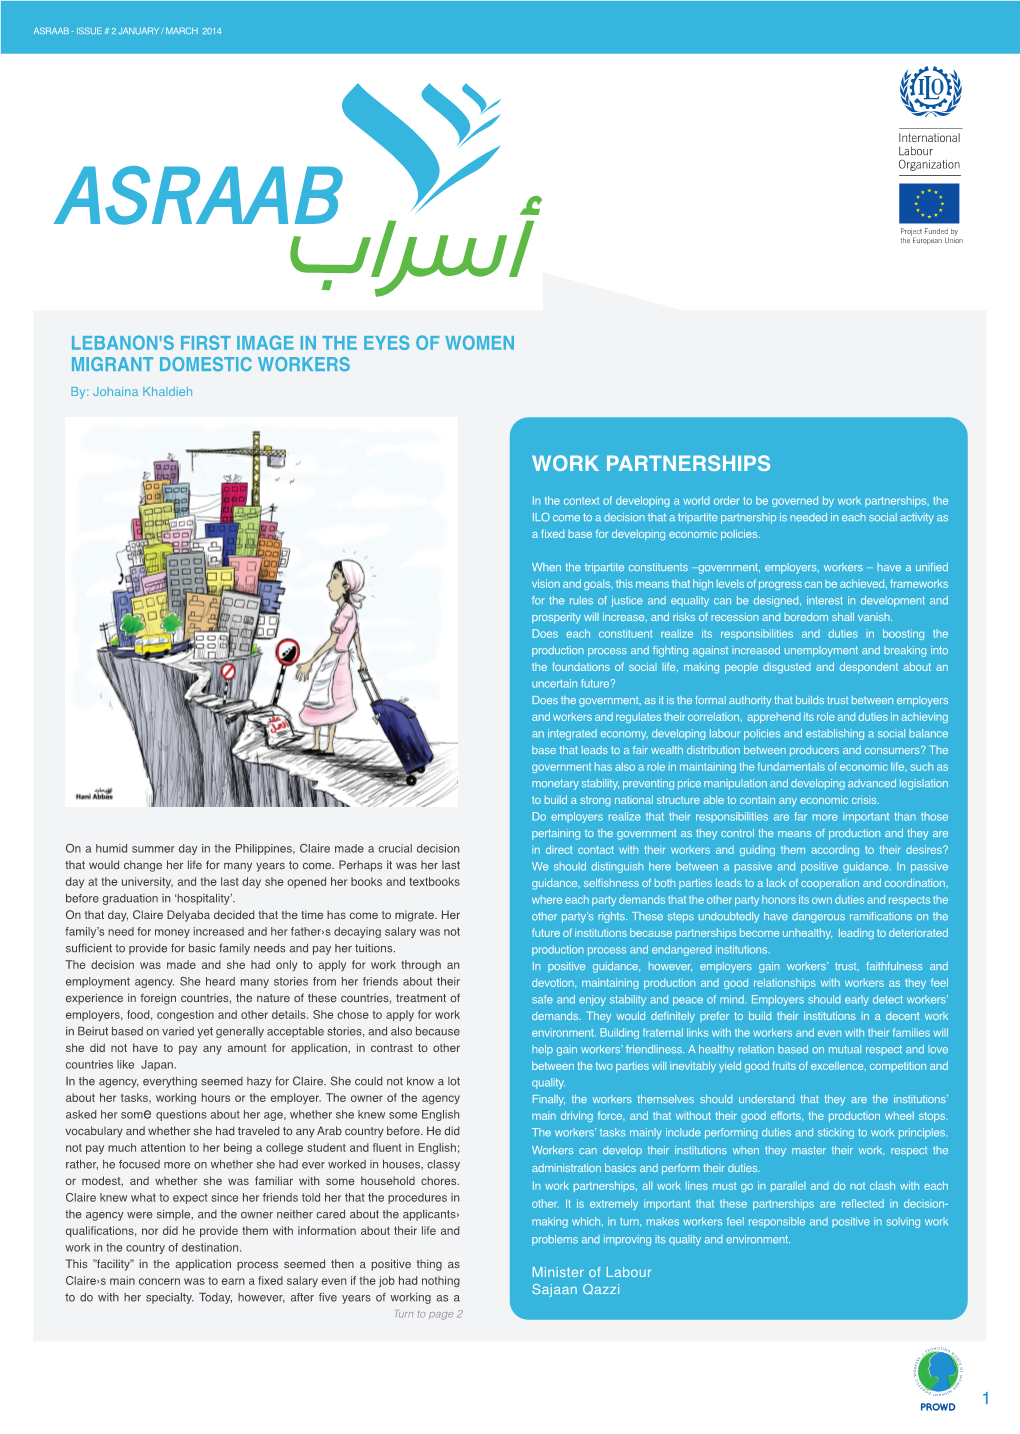 LEBANON's FIRST IMAGE in the EYES of WOMEN MIGRANT DOMESTIC WORKERS By: Johaina Khaldieh